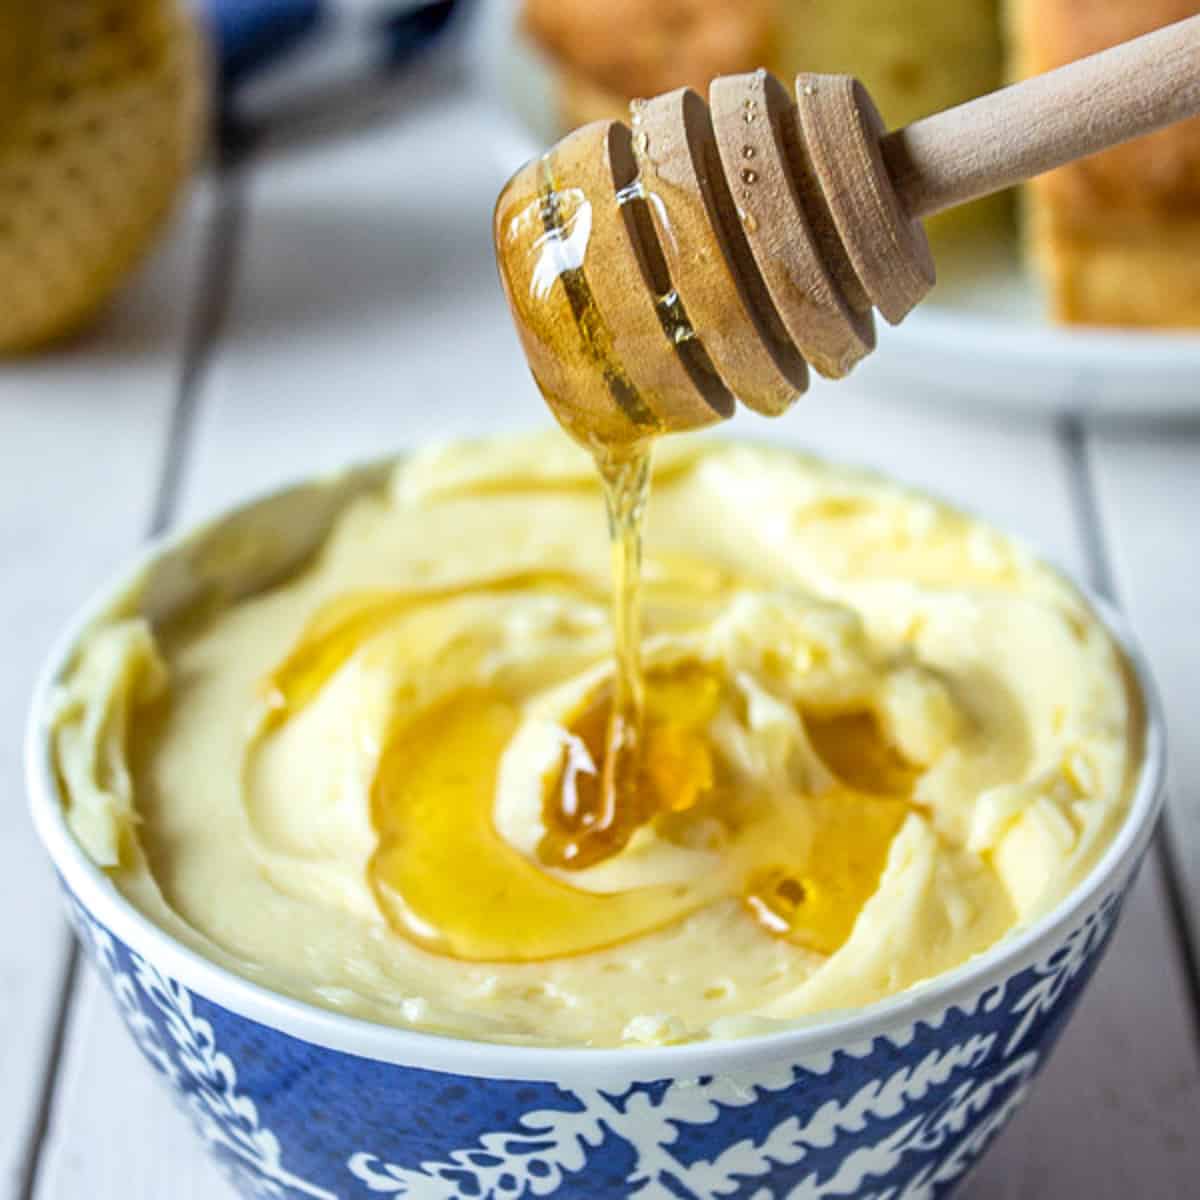 Honey dripping from a wooden dowel onto a bowl of butter.